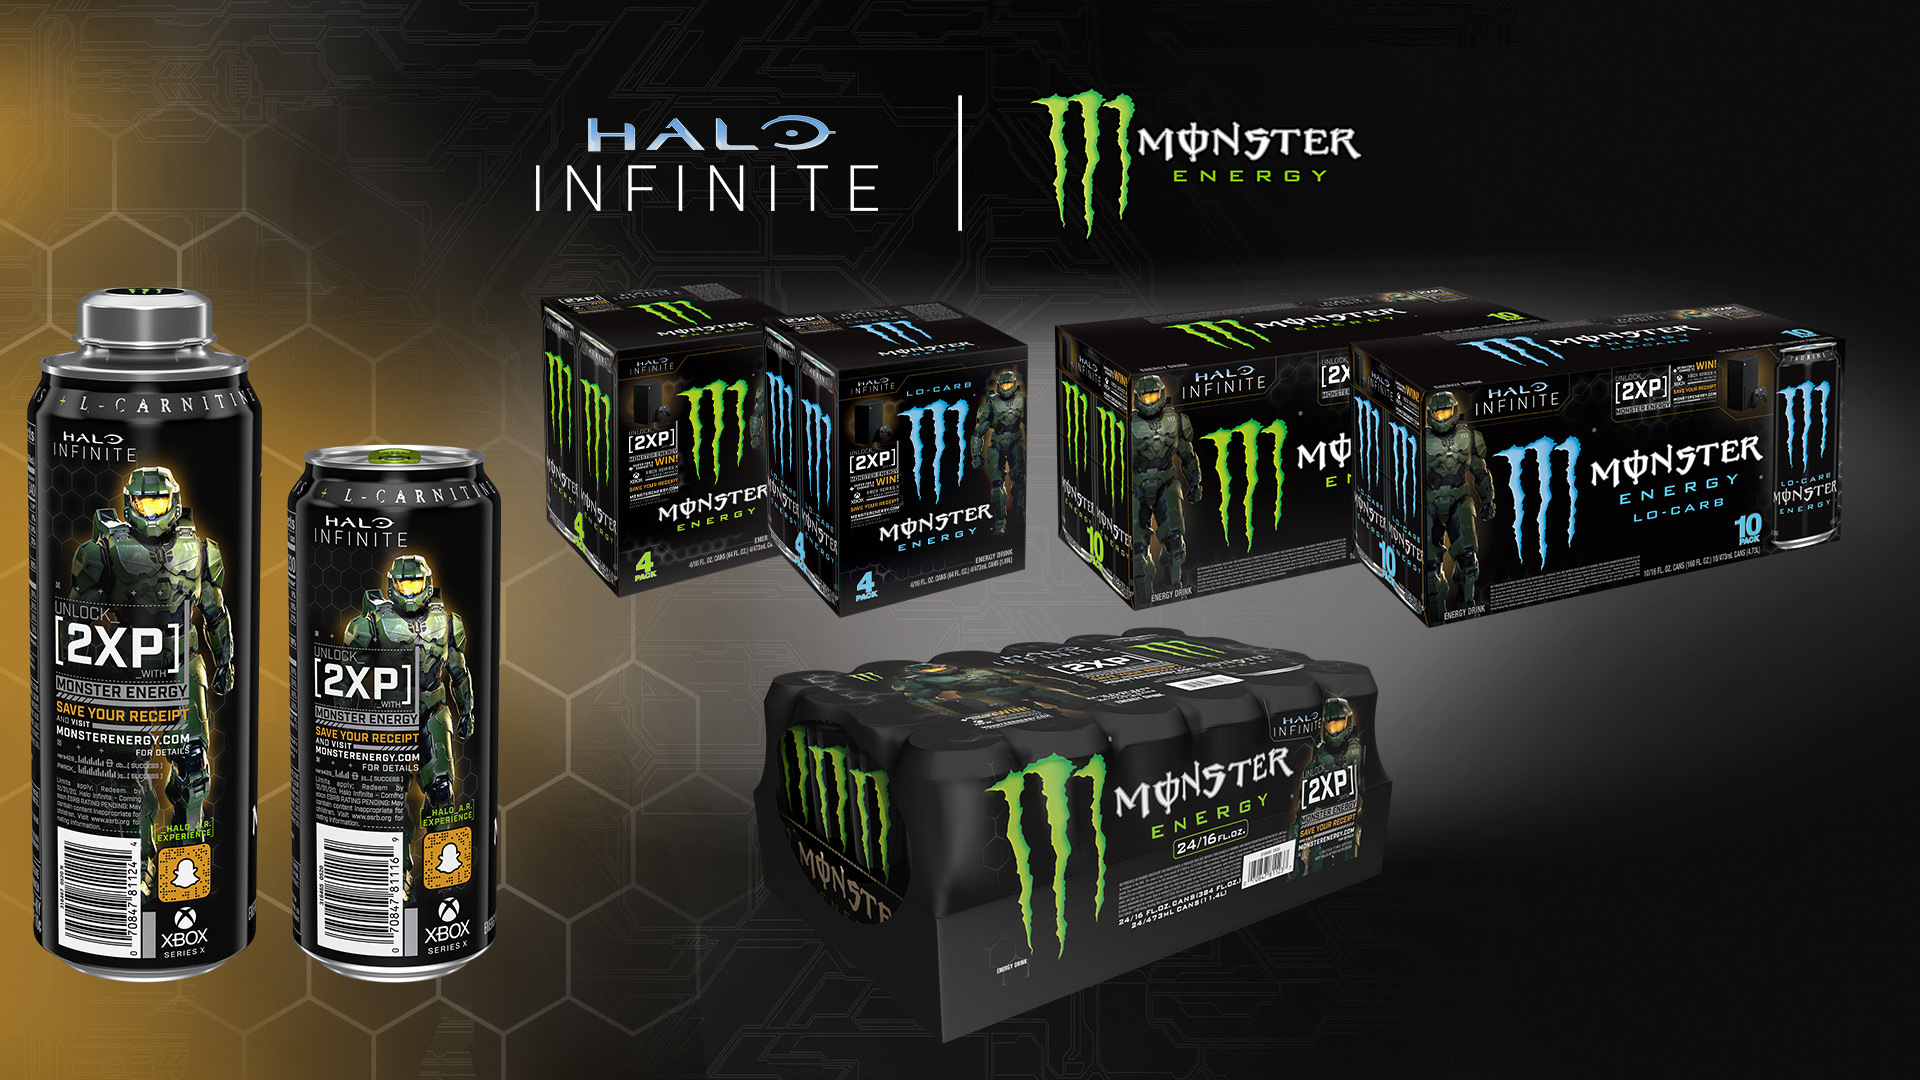 monster energy halo infinite microsoft xbox series x cans